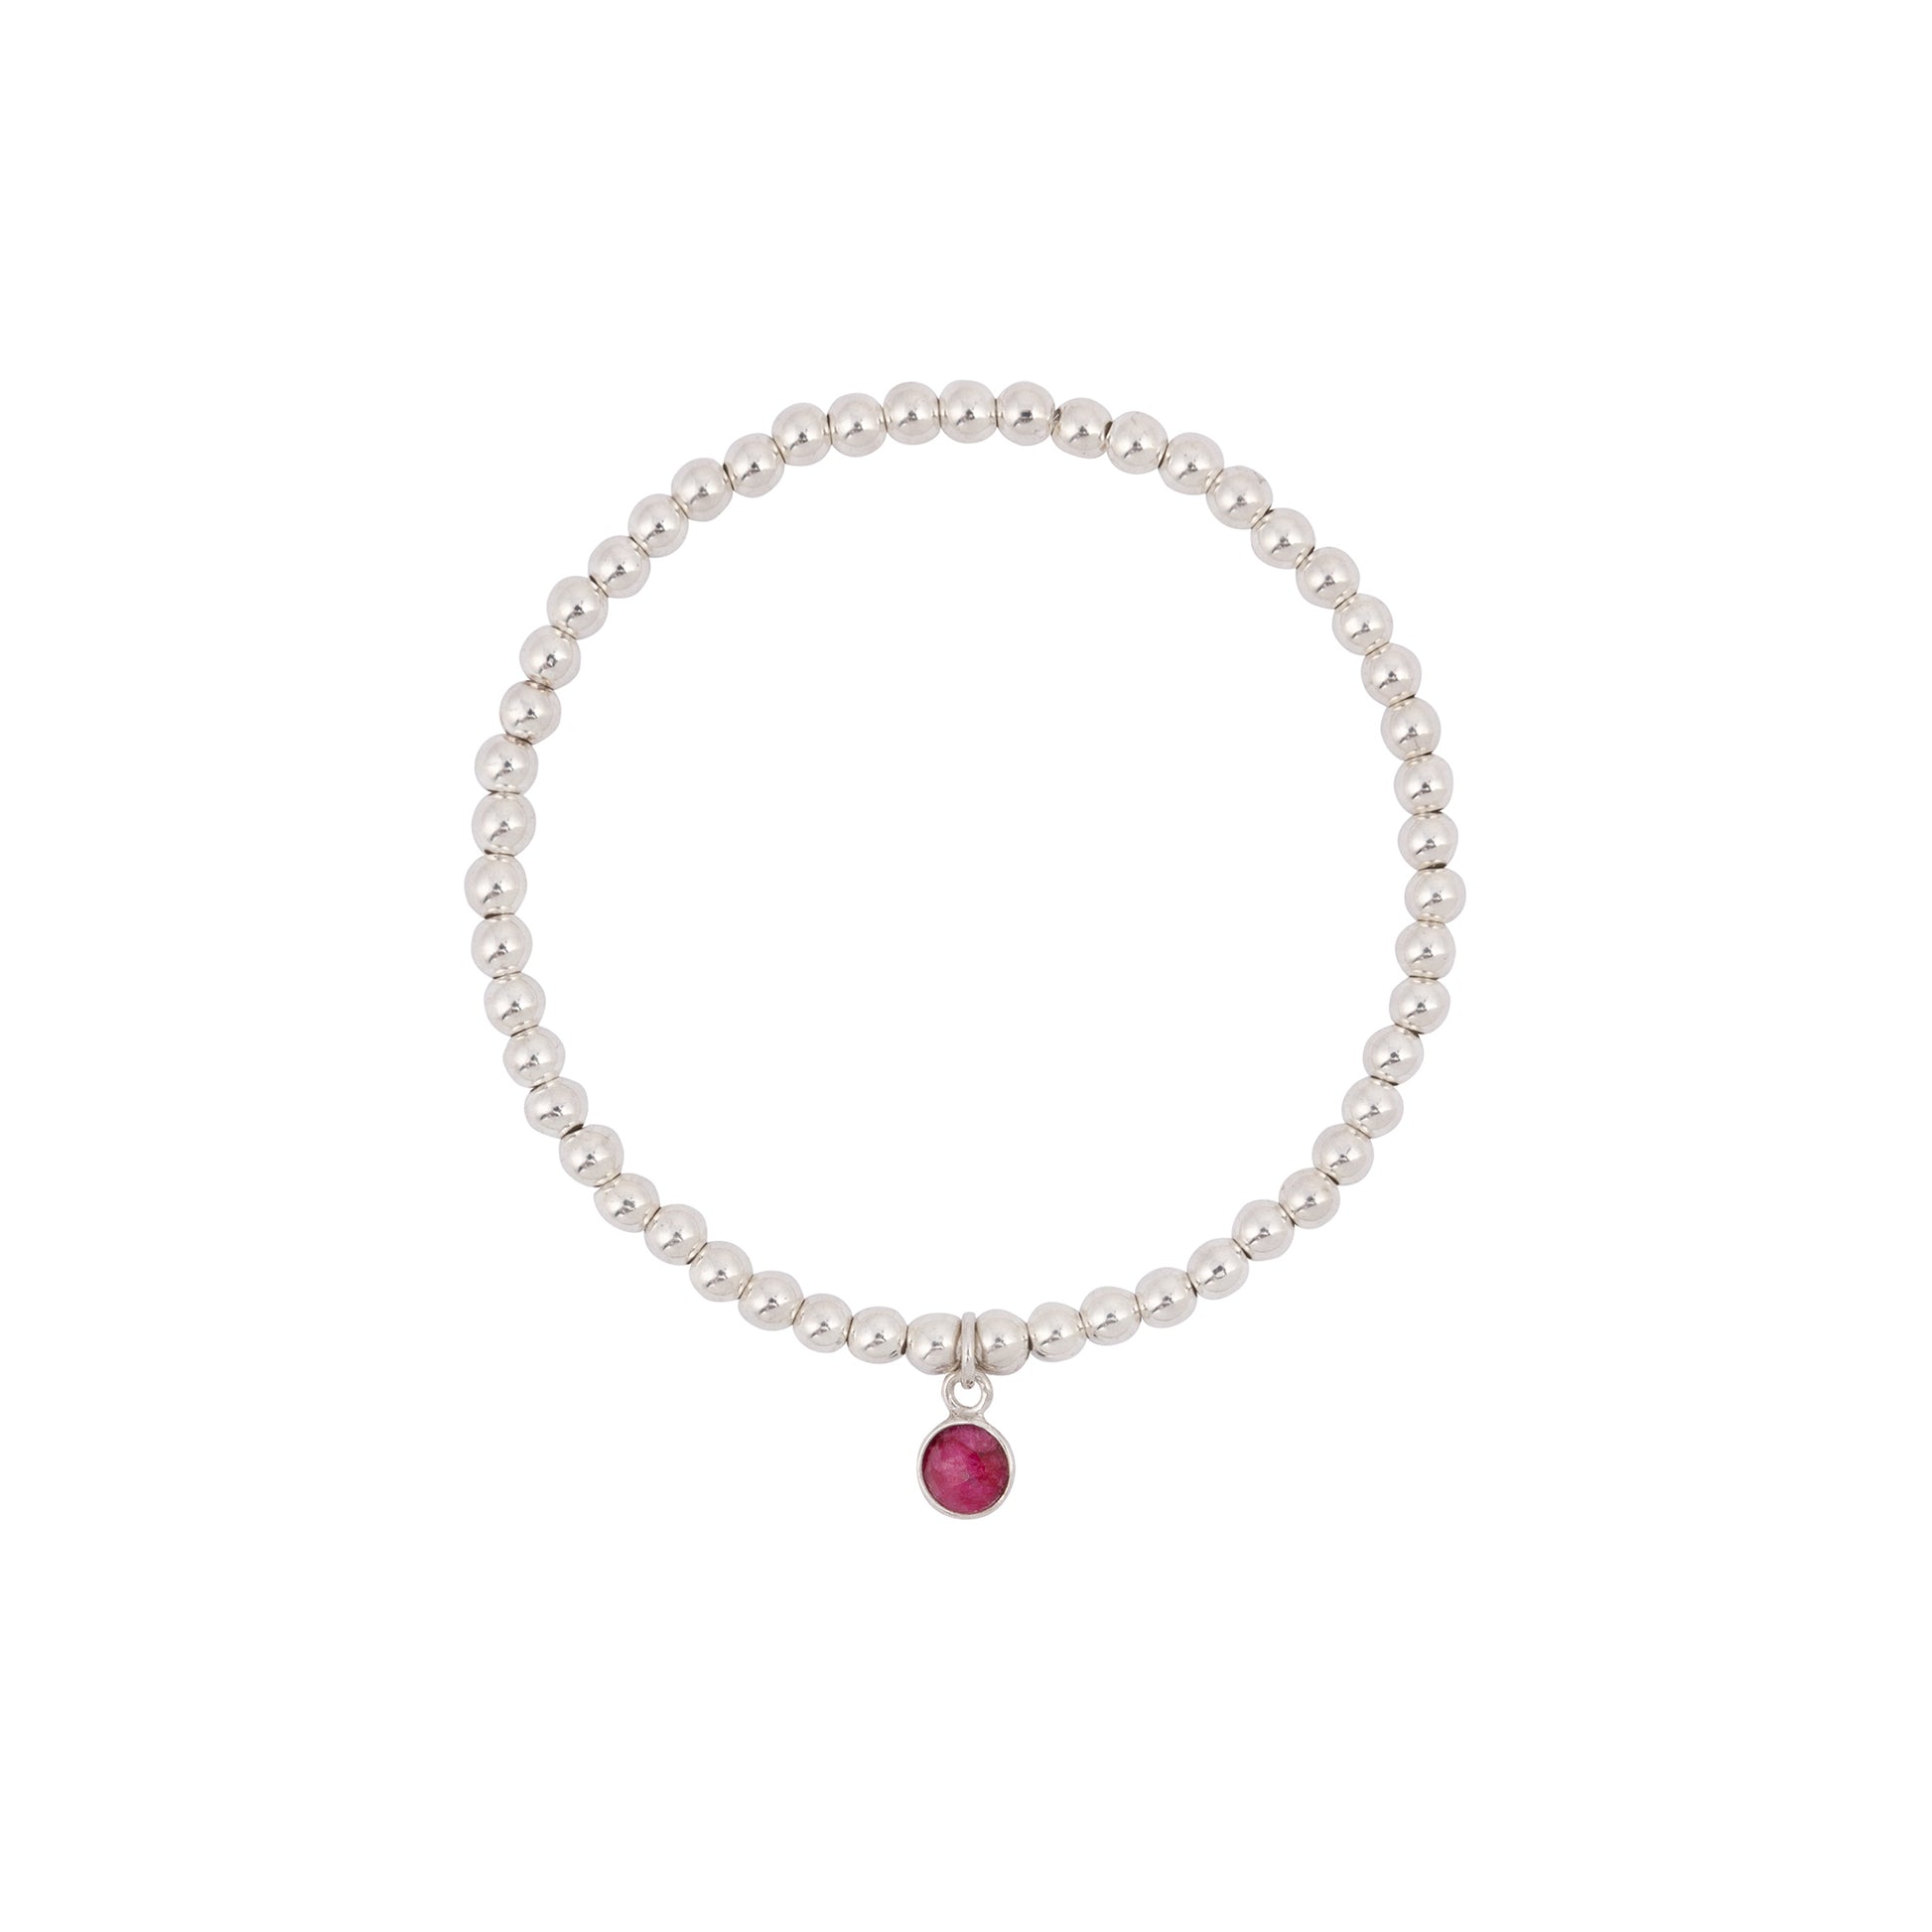 A beaded silver bracelet with a tiny ruby birthstone charm hanging from the center. The Made Here with Love July Birthstone Bracelet is made of uniform sterling silver beads and has a simple, elegant design. The ruby charm adds a subtle pop of color to the overall minimalistic look.